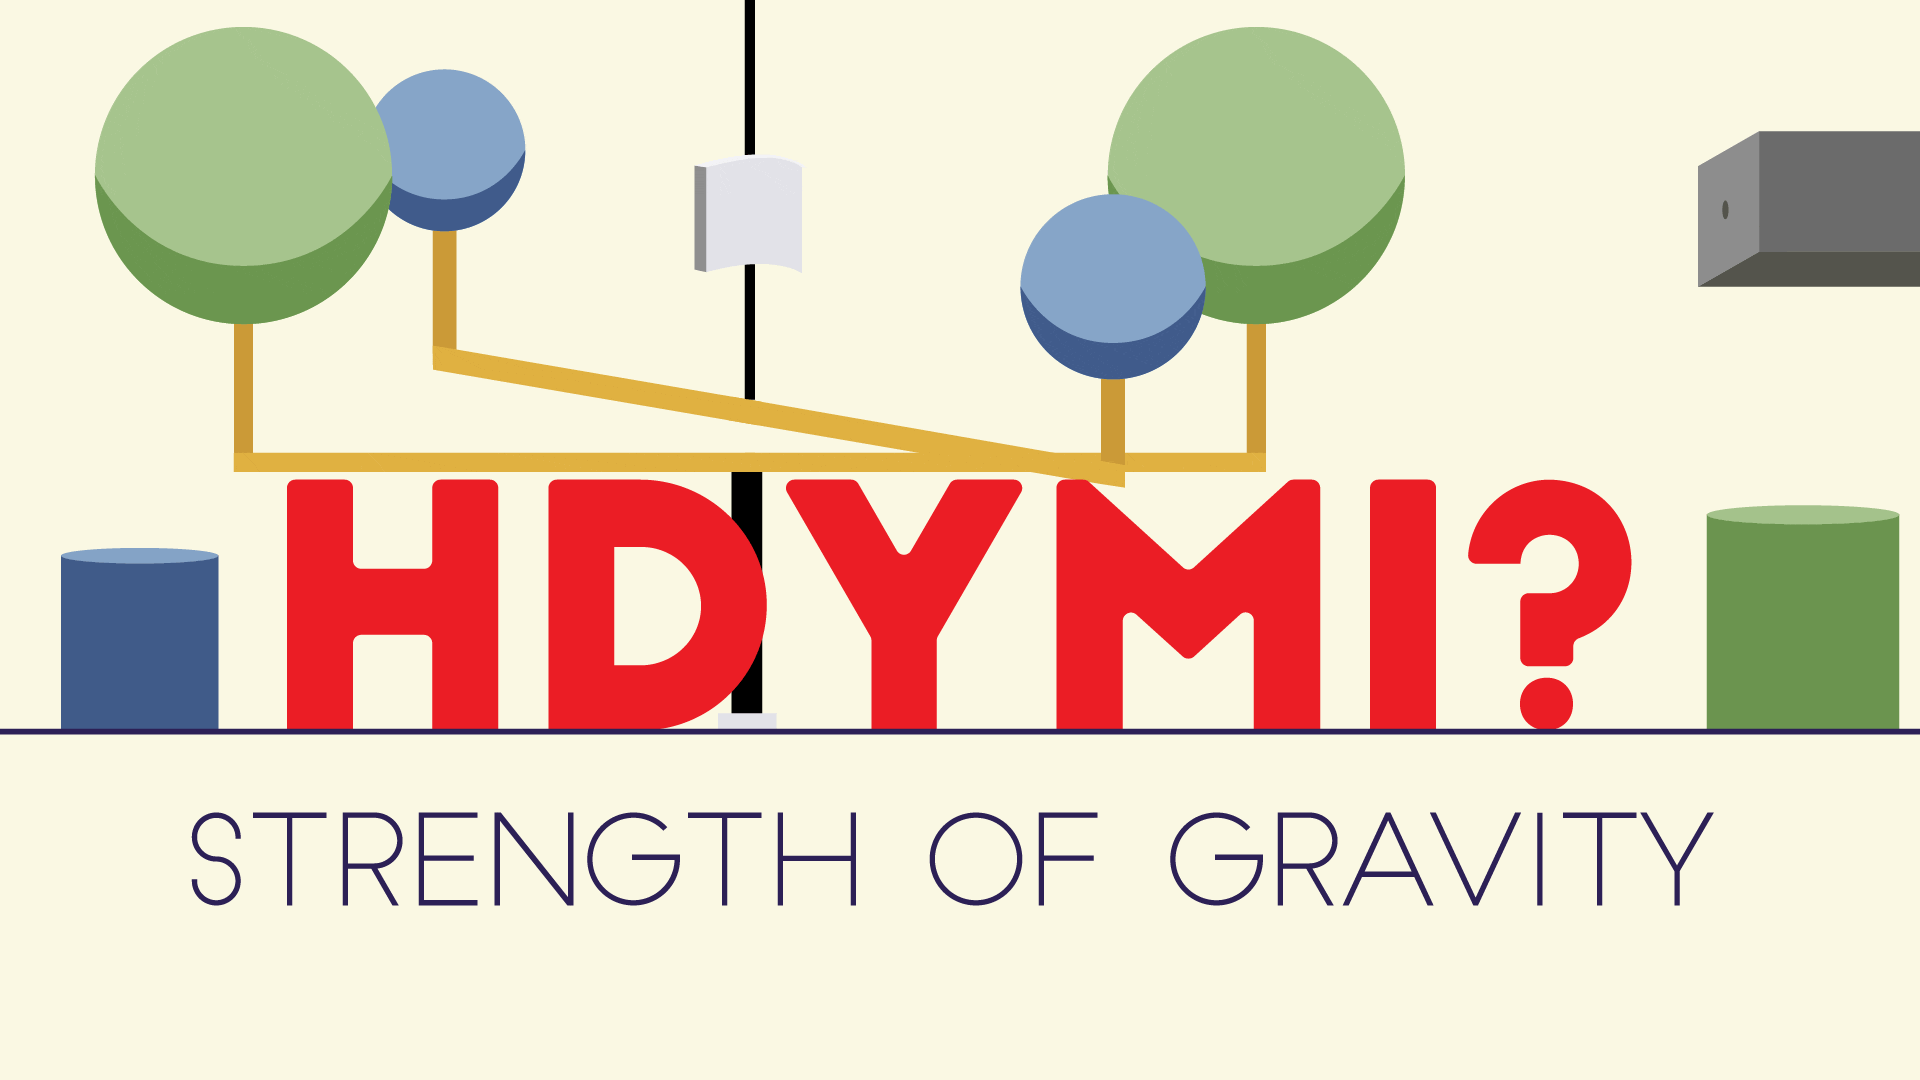 Animation shows the path of a laser moving between large and small spheres and reads: HDYMI? Strength of Gravity